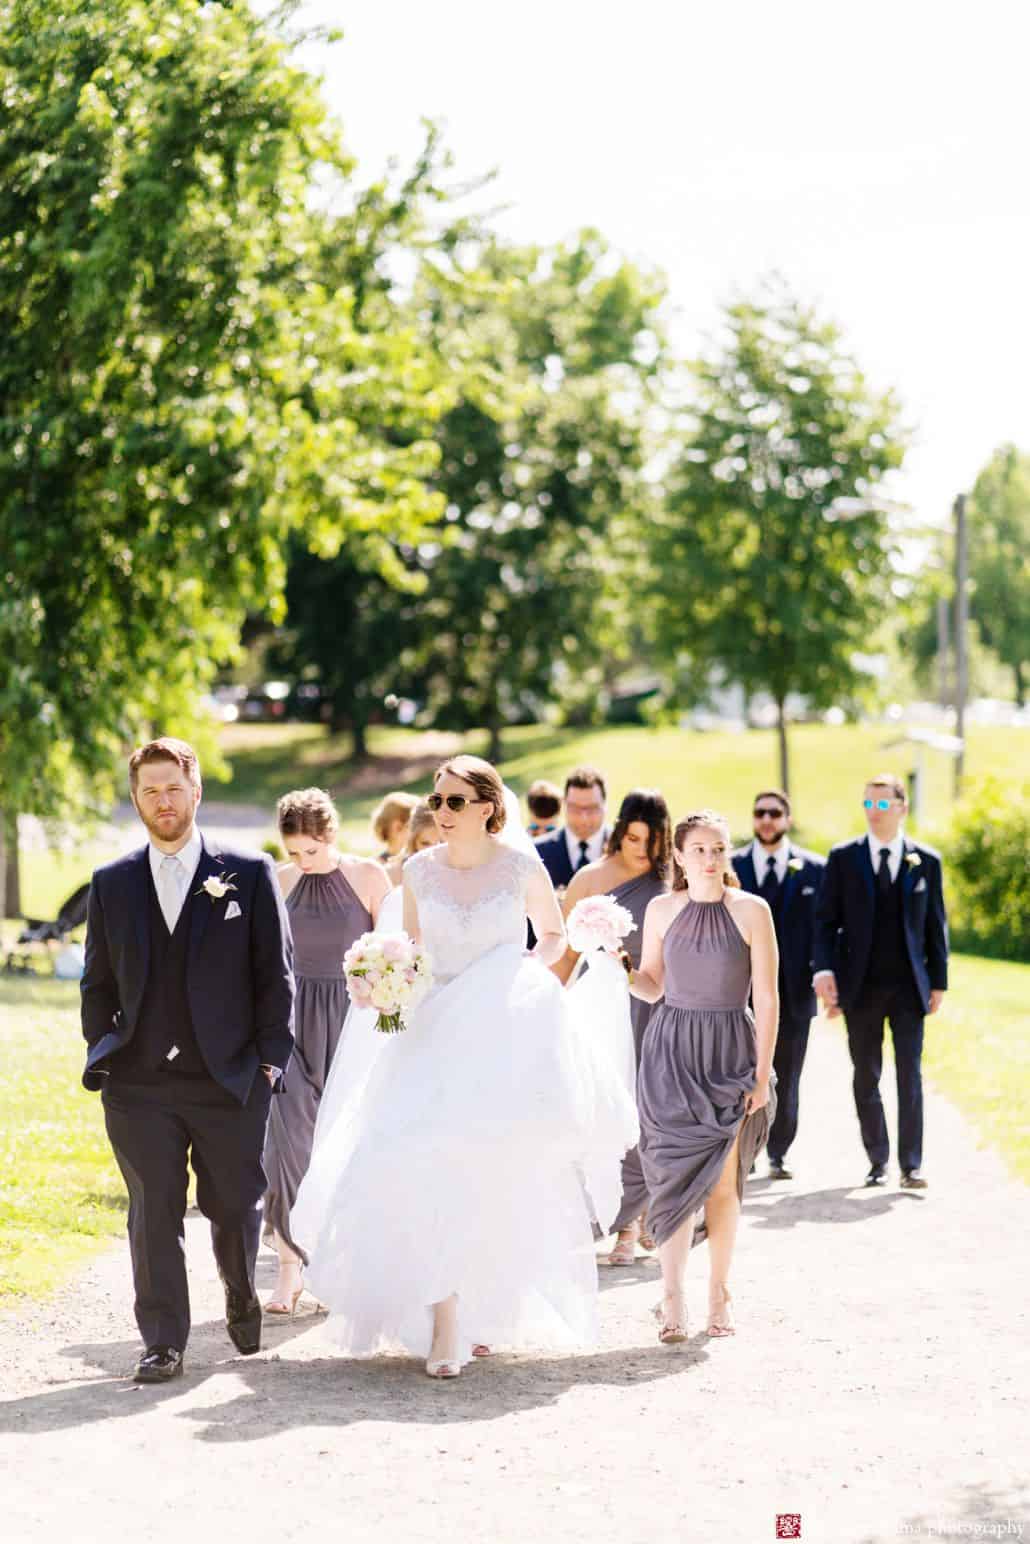 outdoor wedding candid picture bride in wedding dress with groom family walking wearing sunglasses summer wedding by the trees Late Spring Mercer County Boathouse Princeton NJ Wedding